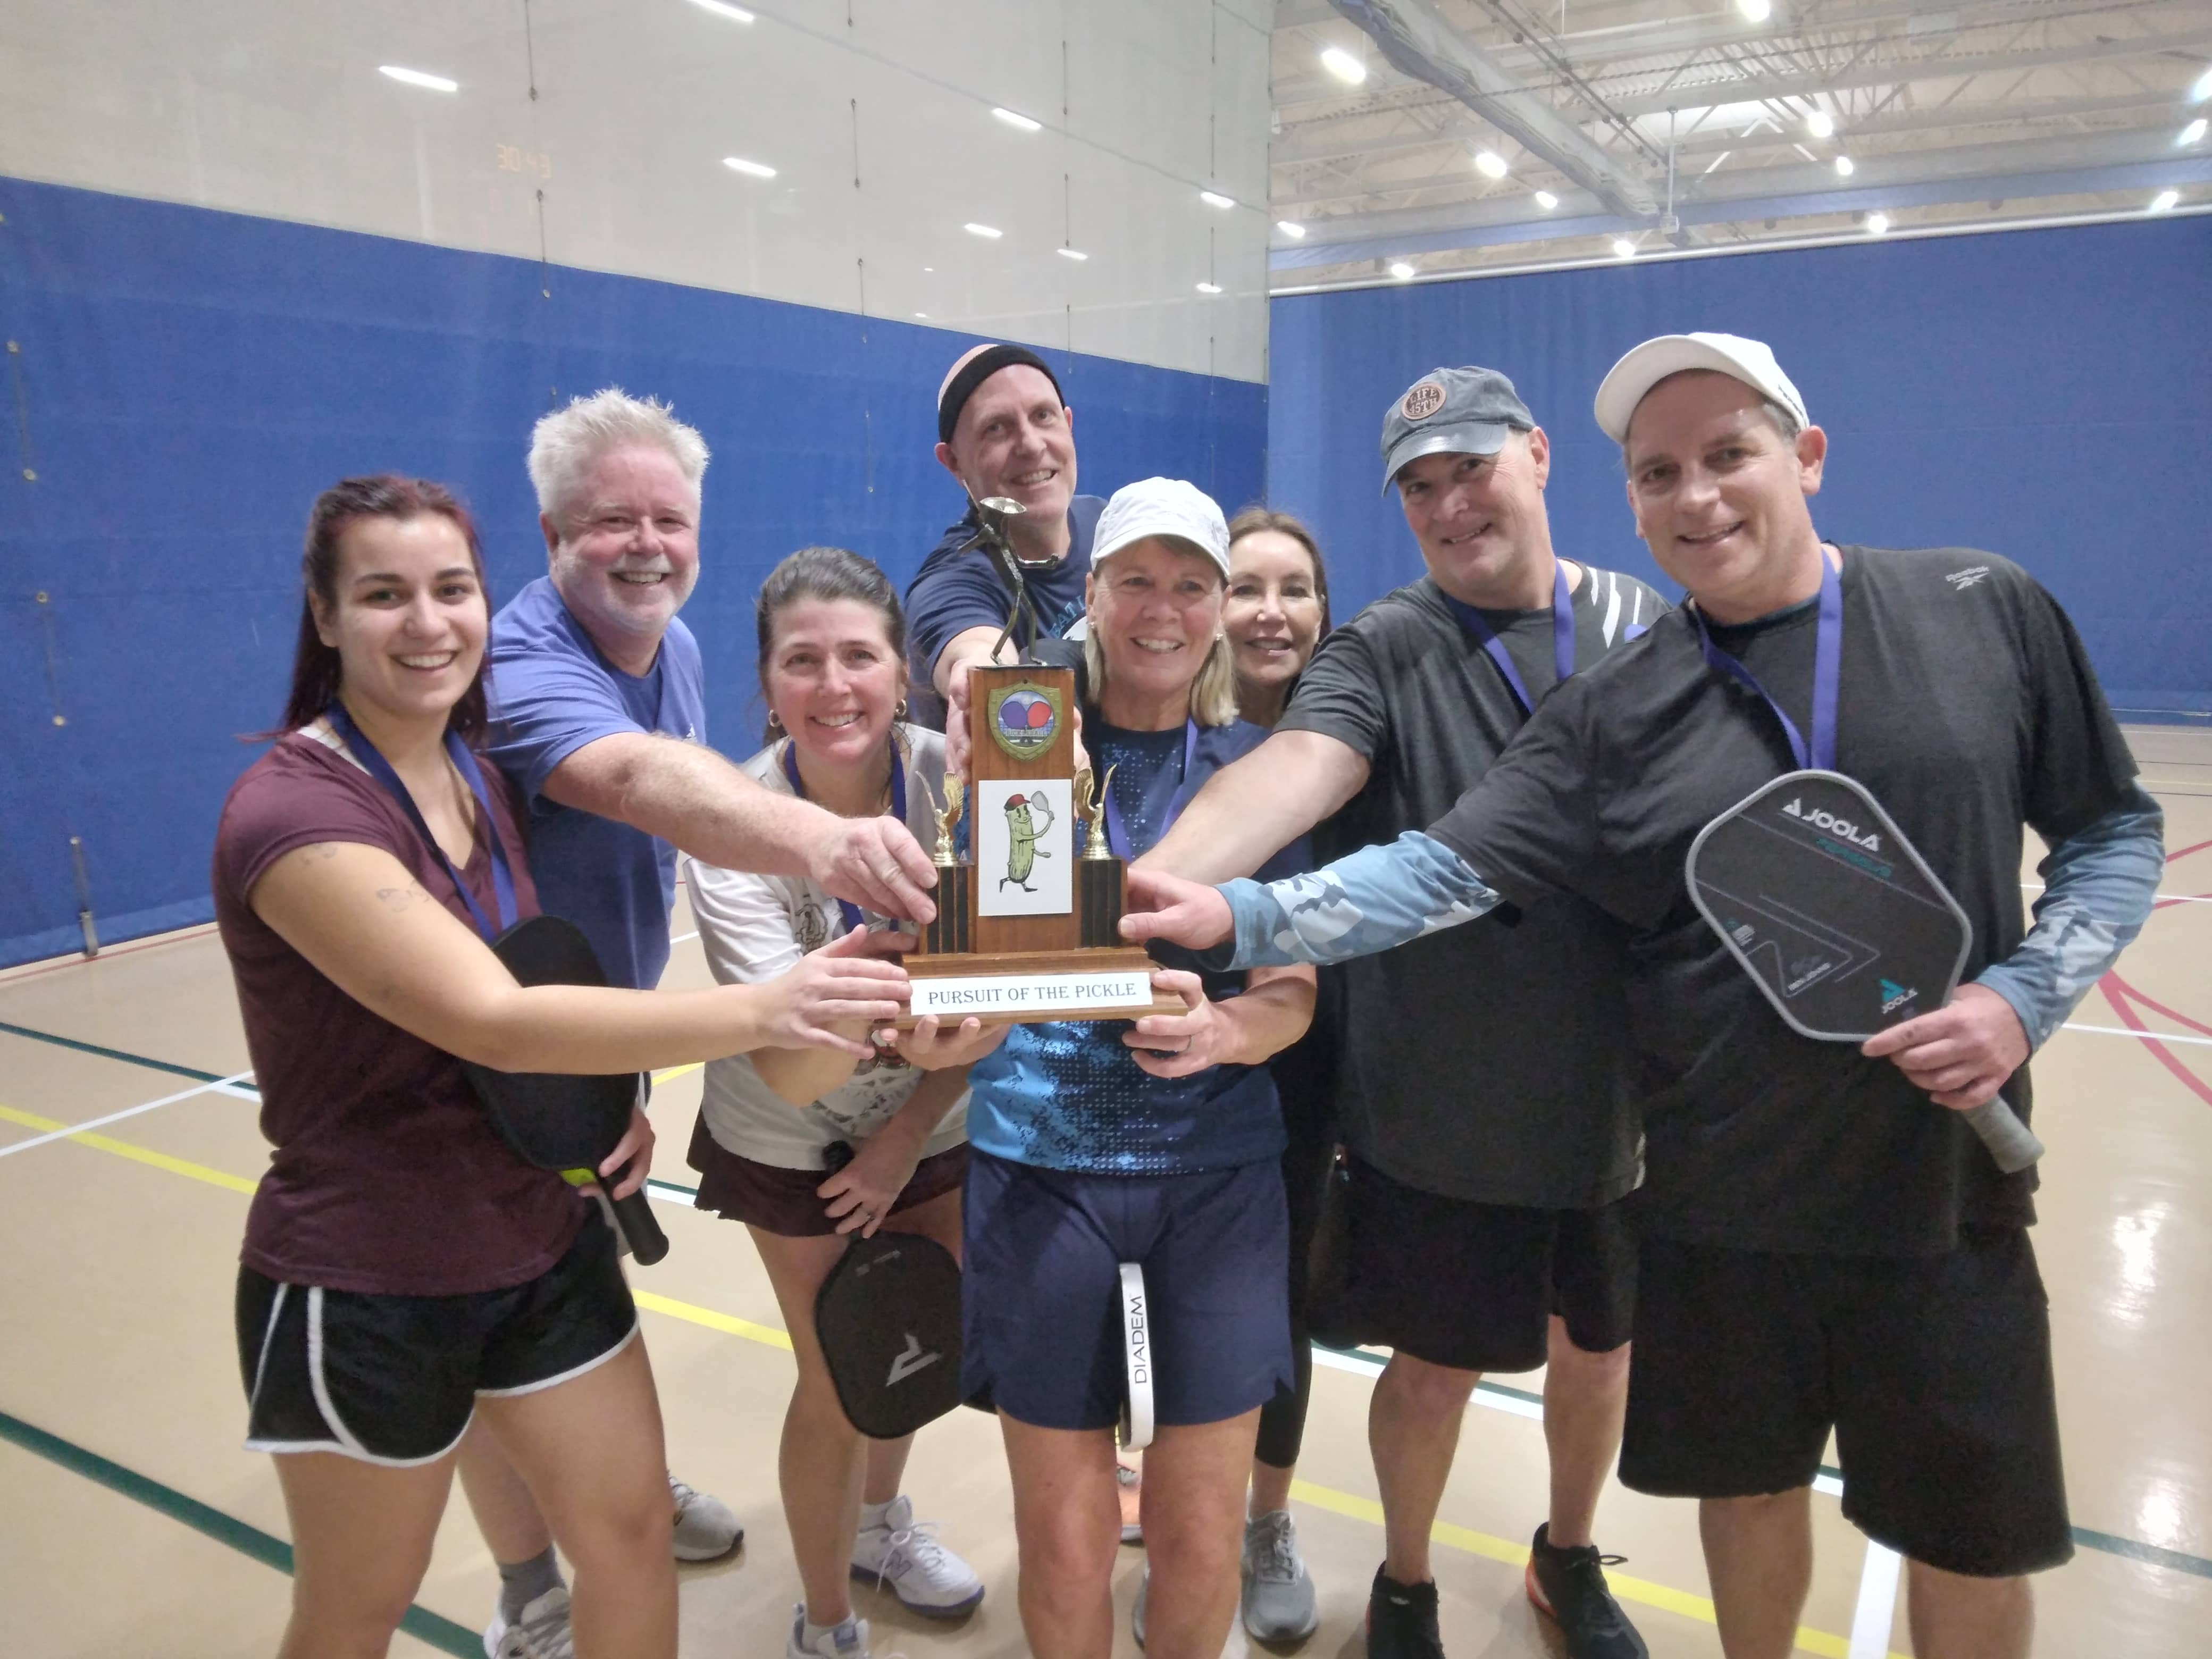 Eight pickleball players, standing with a trophy